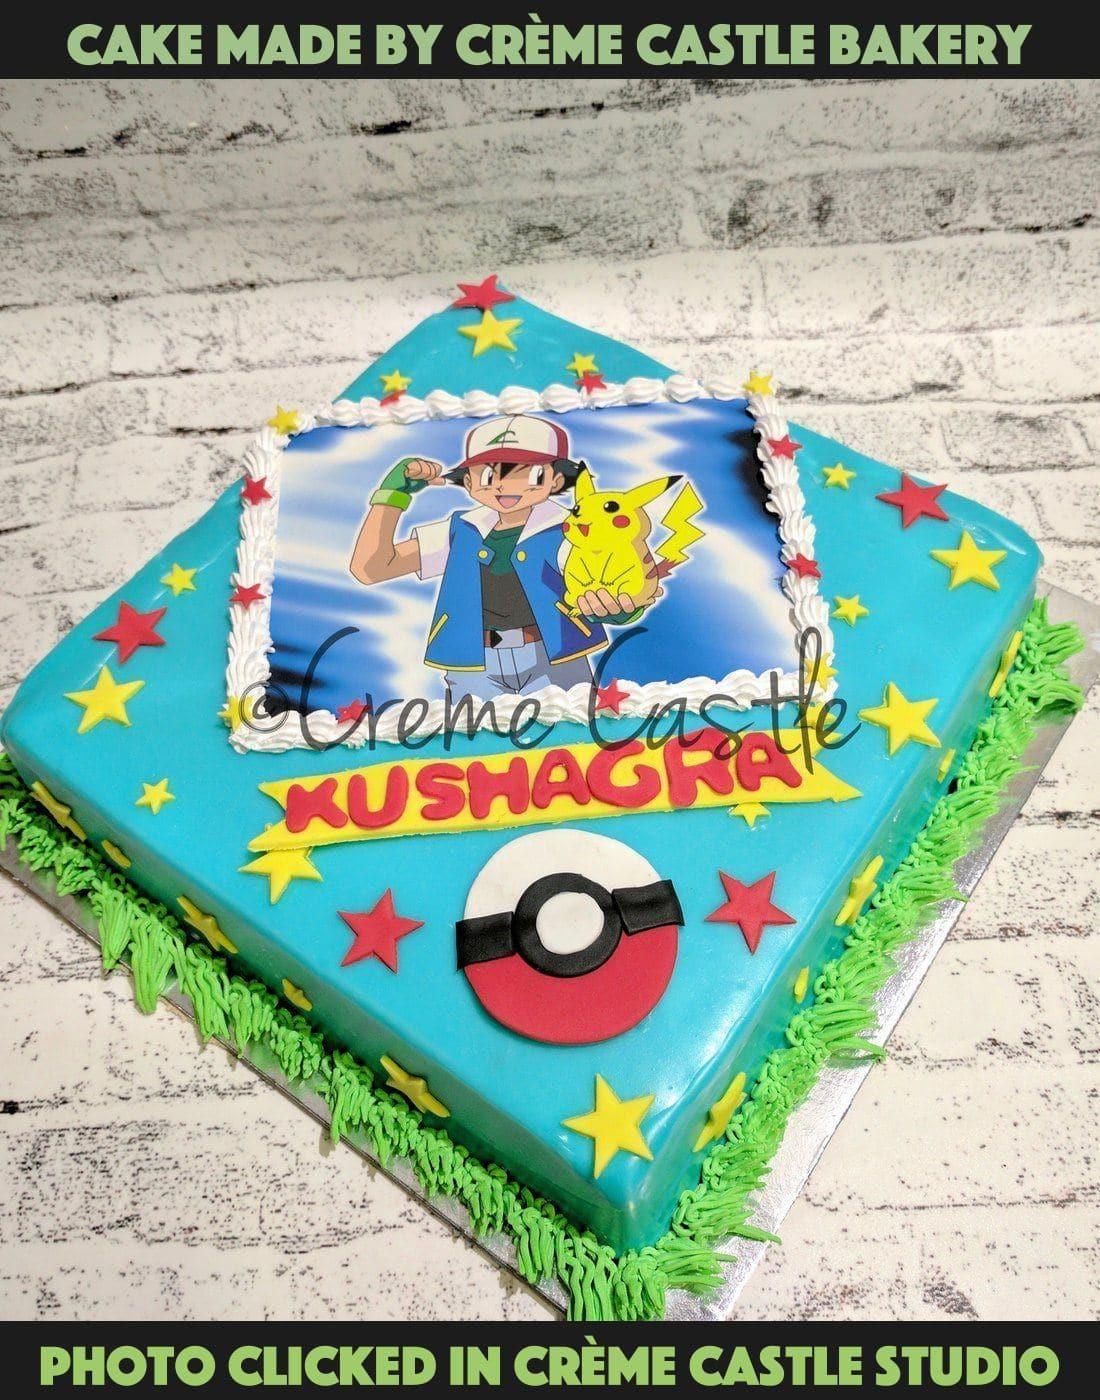 Pokemon Snap Assorted Pokemon Edible Cake Topper Image ABPID55439 – A  Birthday Place